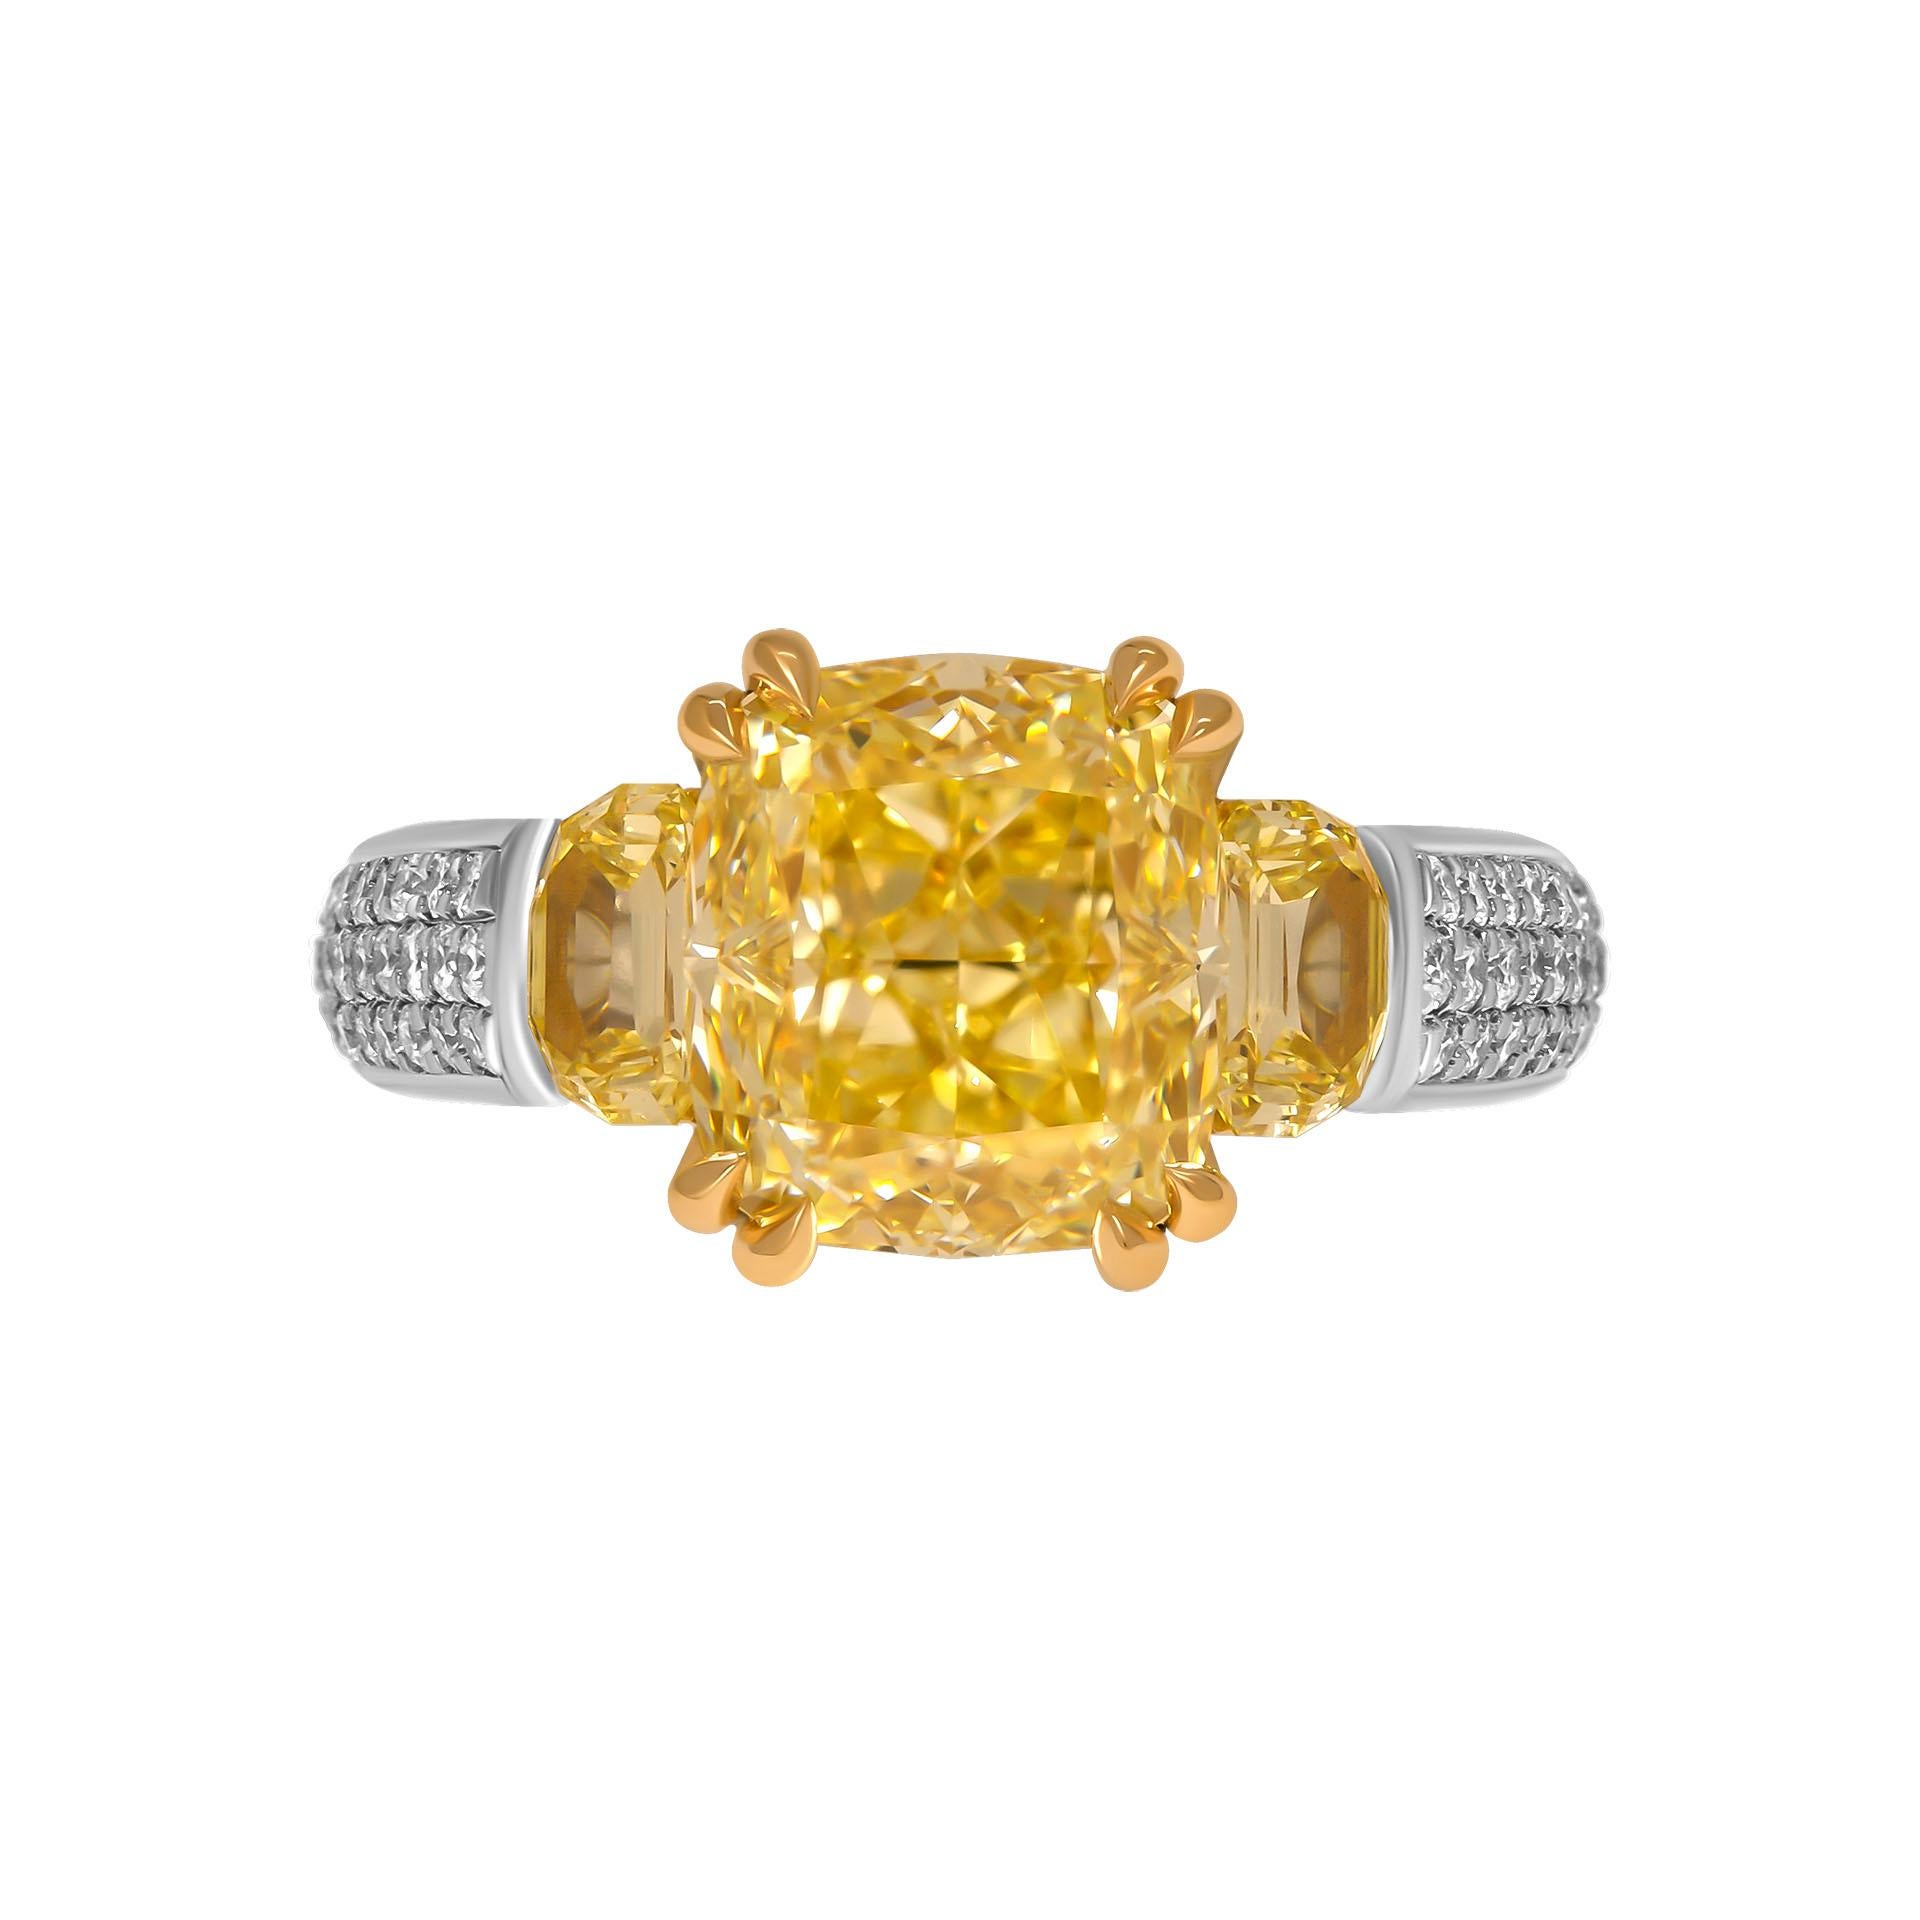 3 stone ring in Platinum & 18K Yellow Gold

Center: 4.04ct Natural Fancy Yellow Even VVS2 Cushion Shape Diamond GIA#2223222634 

Two side half-moons shapes diamond:
                                                               0.27ct Fancy Intense